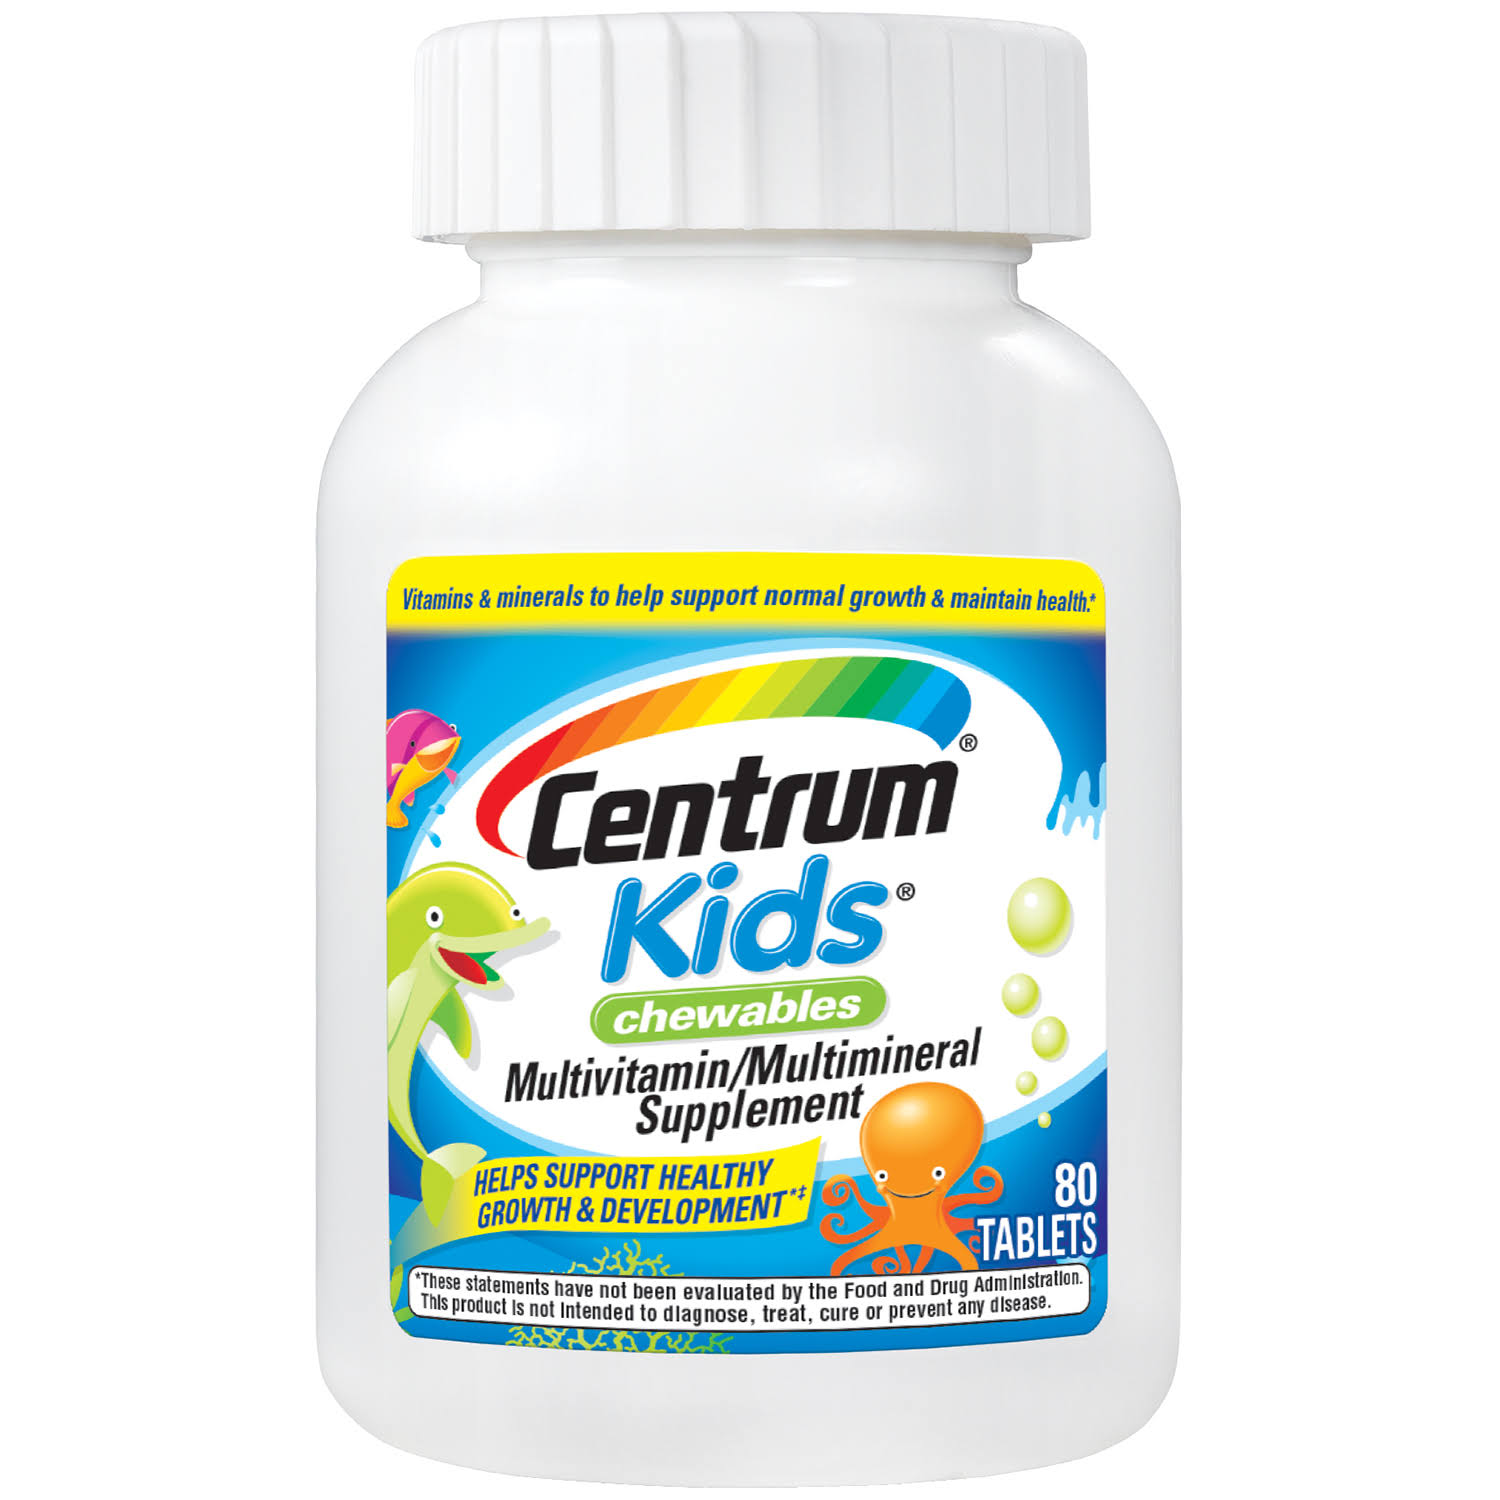 Centrum Kids Chewable Multivitamin And Multimineral Supplement - 80 Tablets